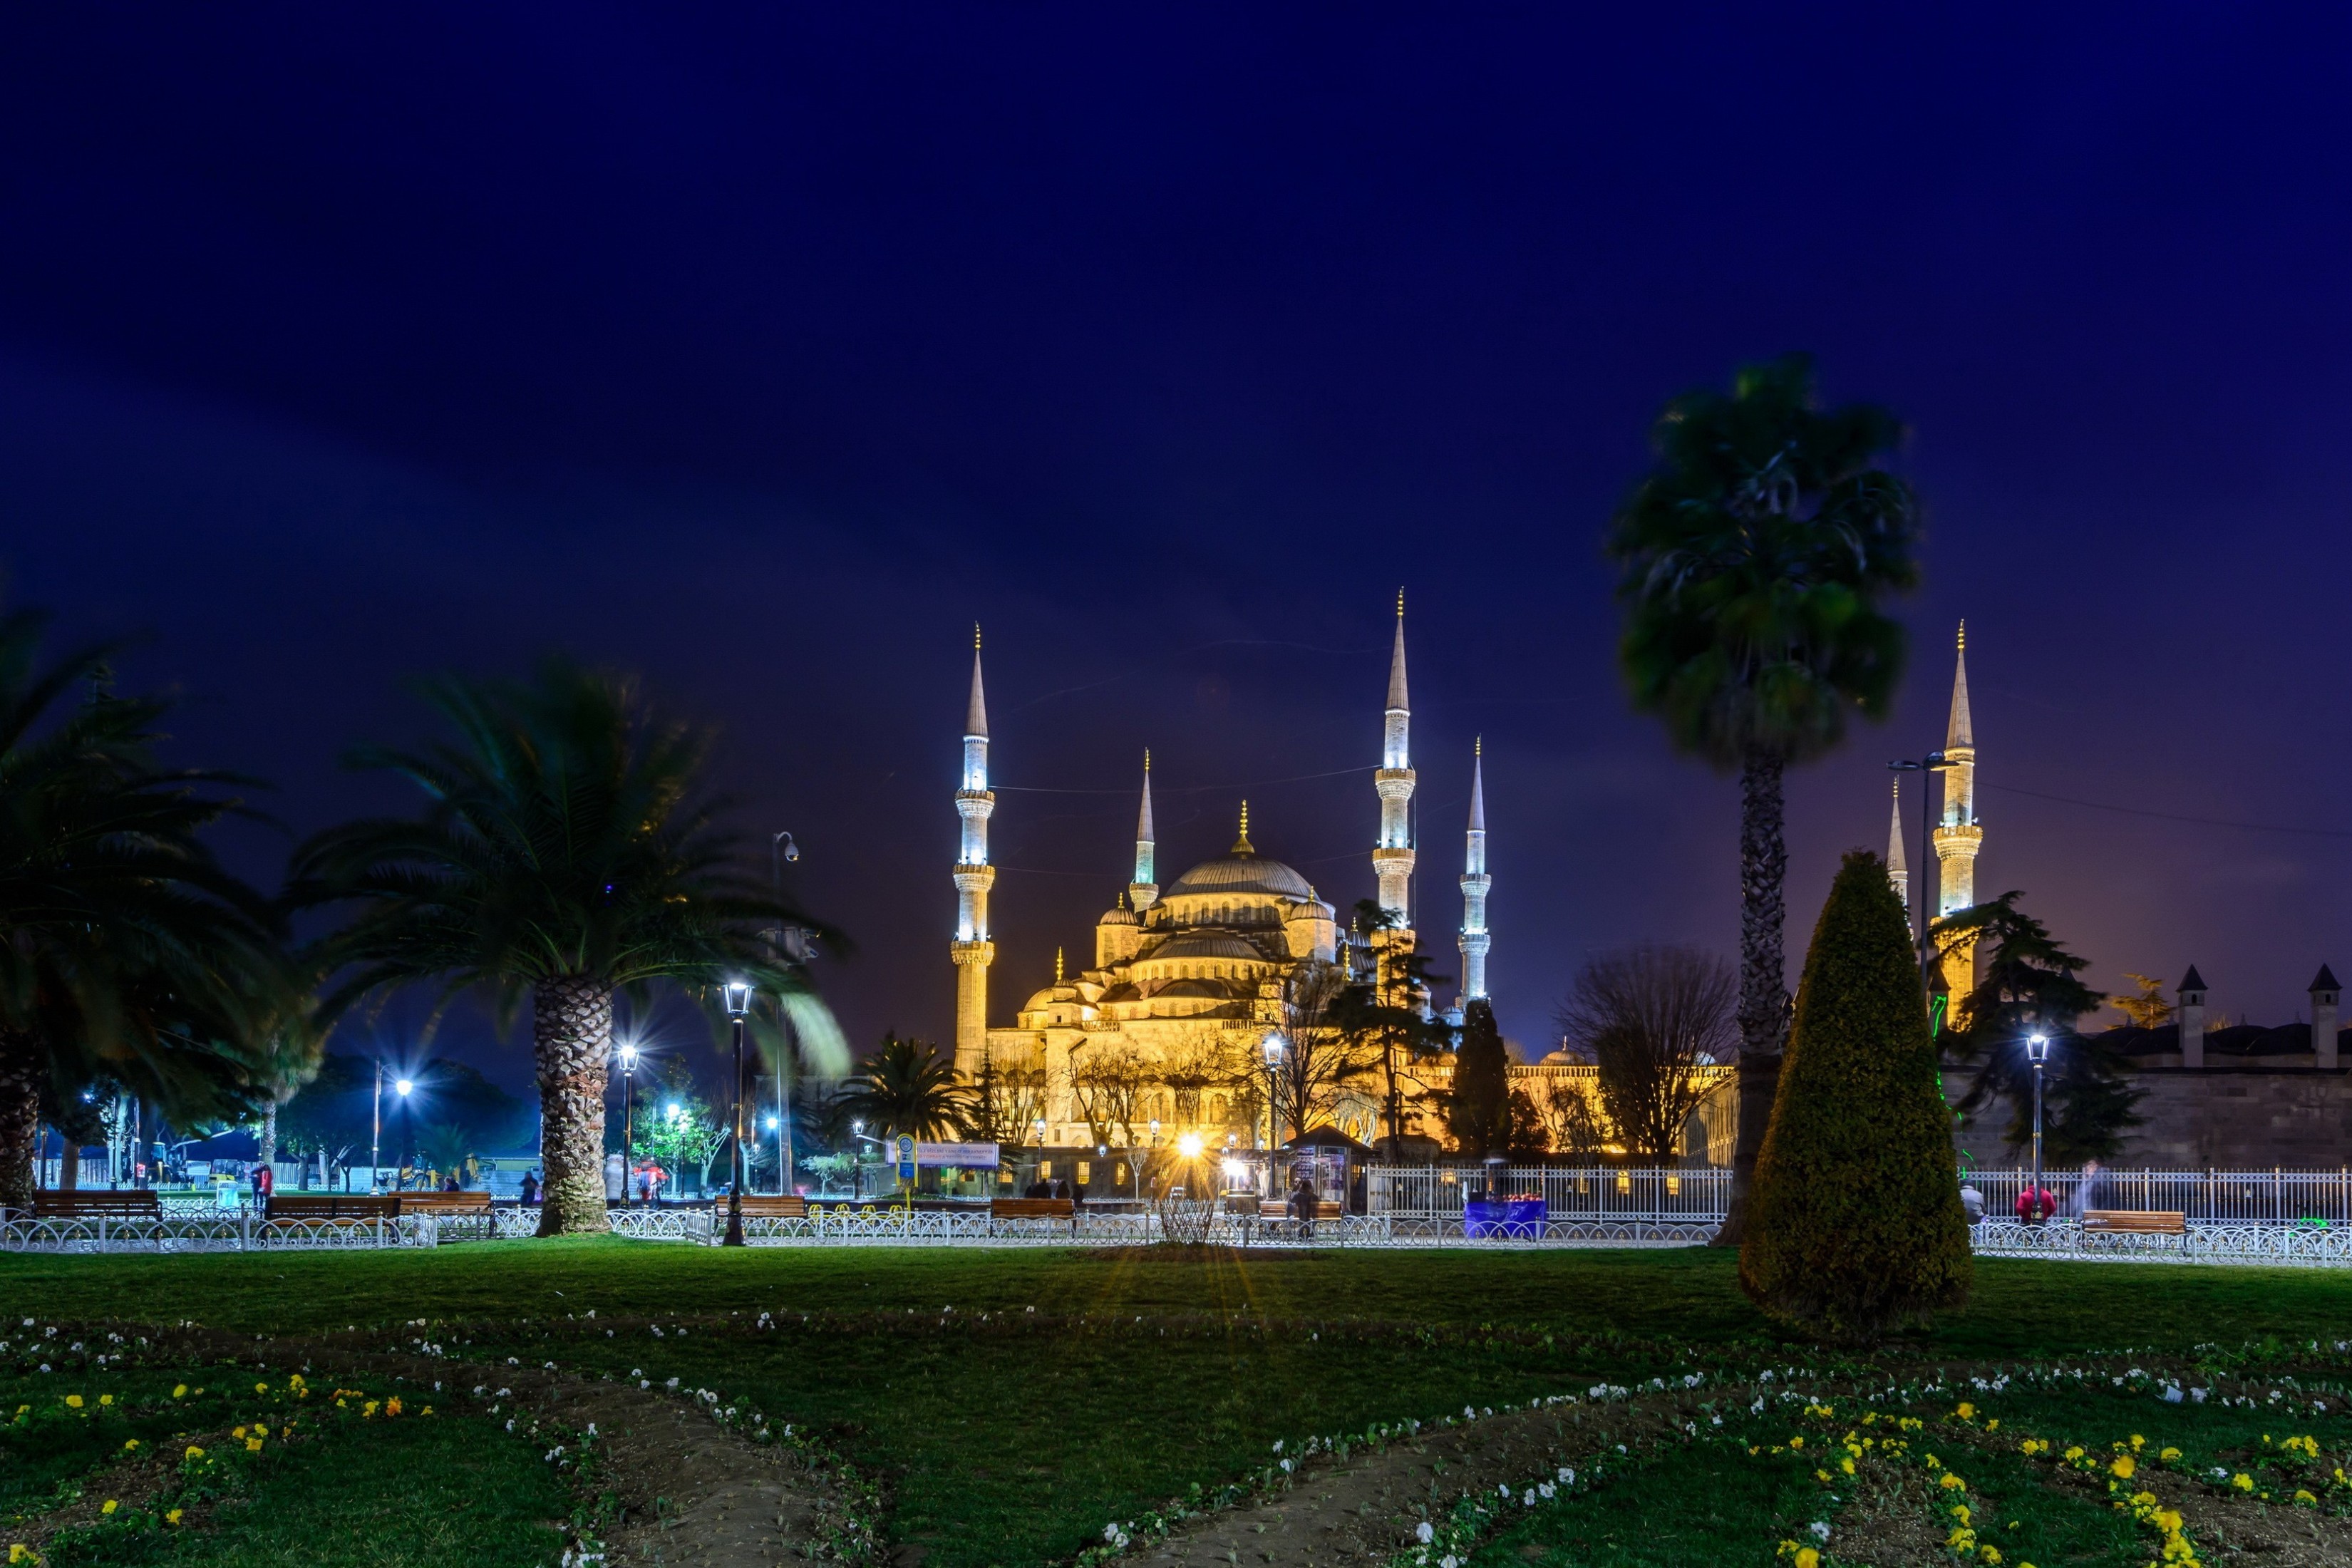 sultan ahmed mosque, mosque, turkey, religious, istanbul, mosques